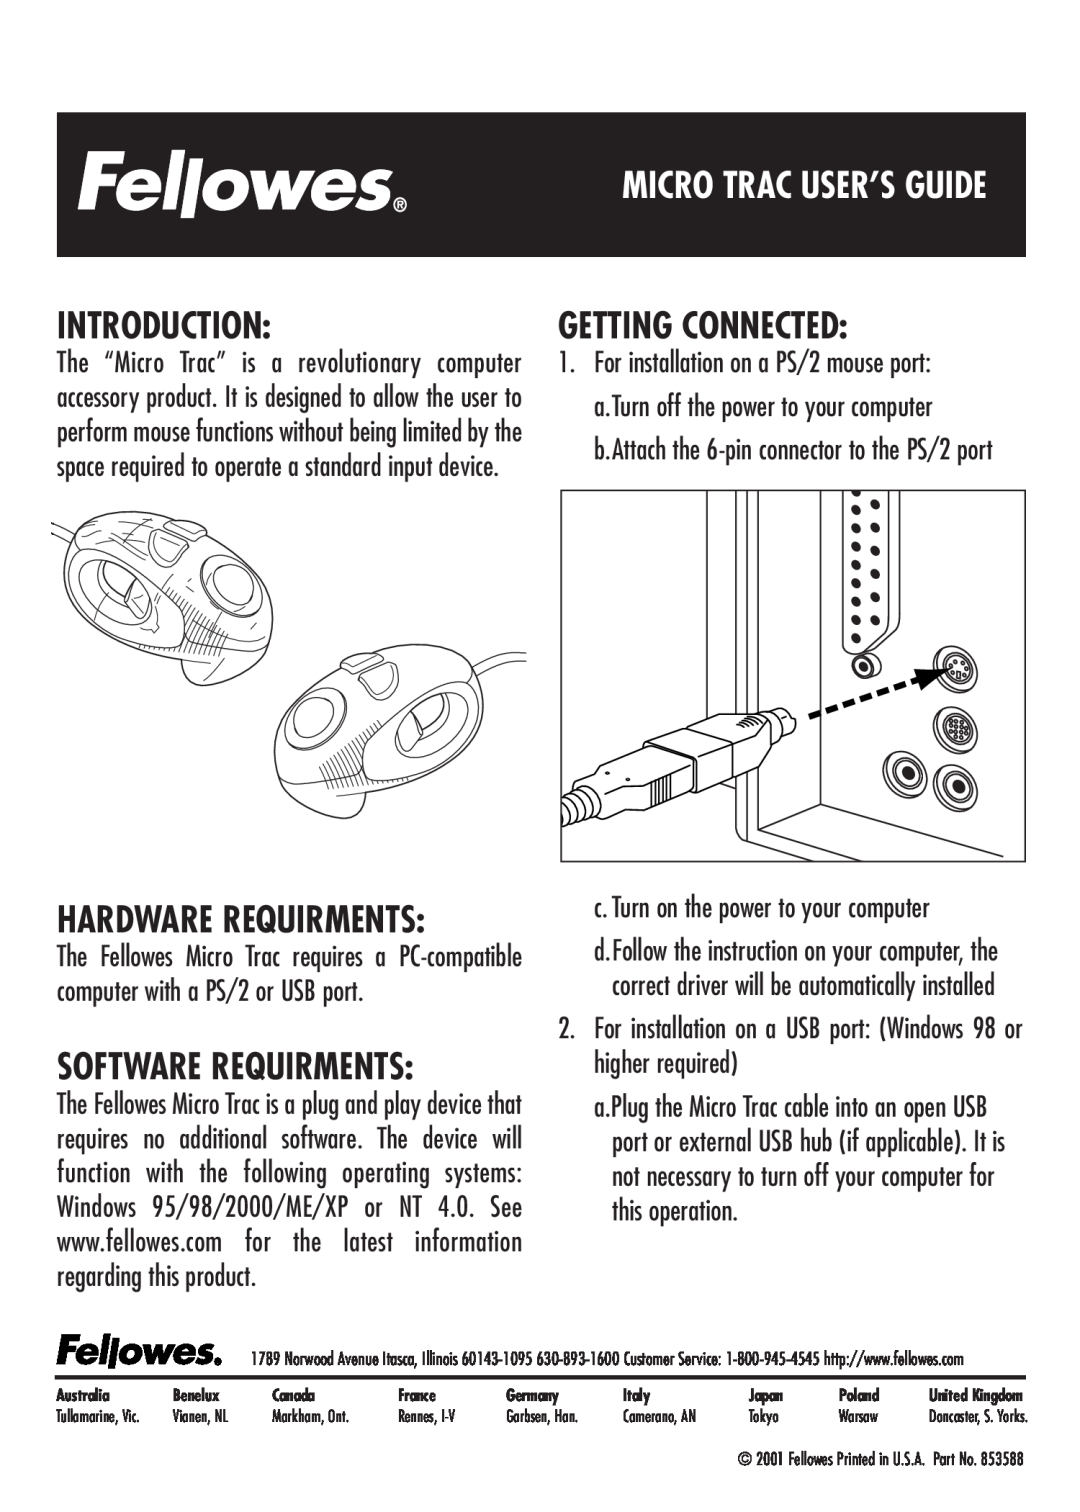 Fellowes Computer Accessories manual Introduction, Software Requirments, Getting Connected, Hardware Requirments 